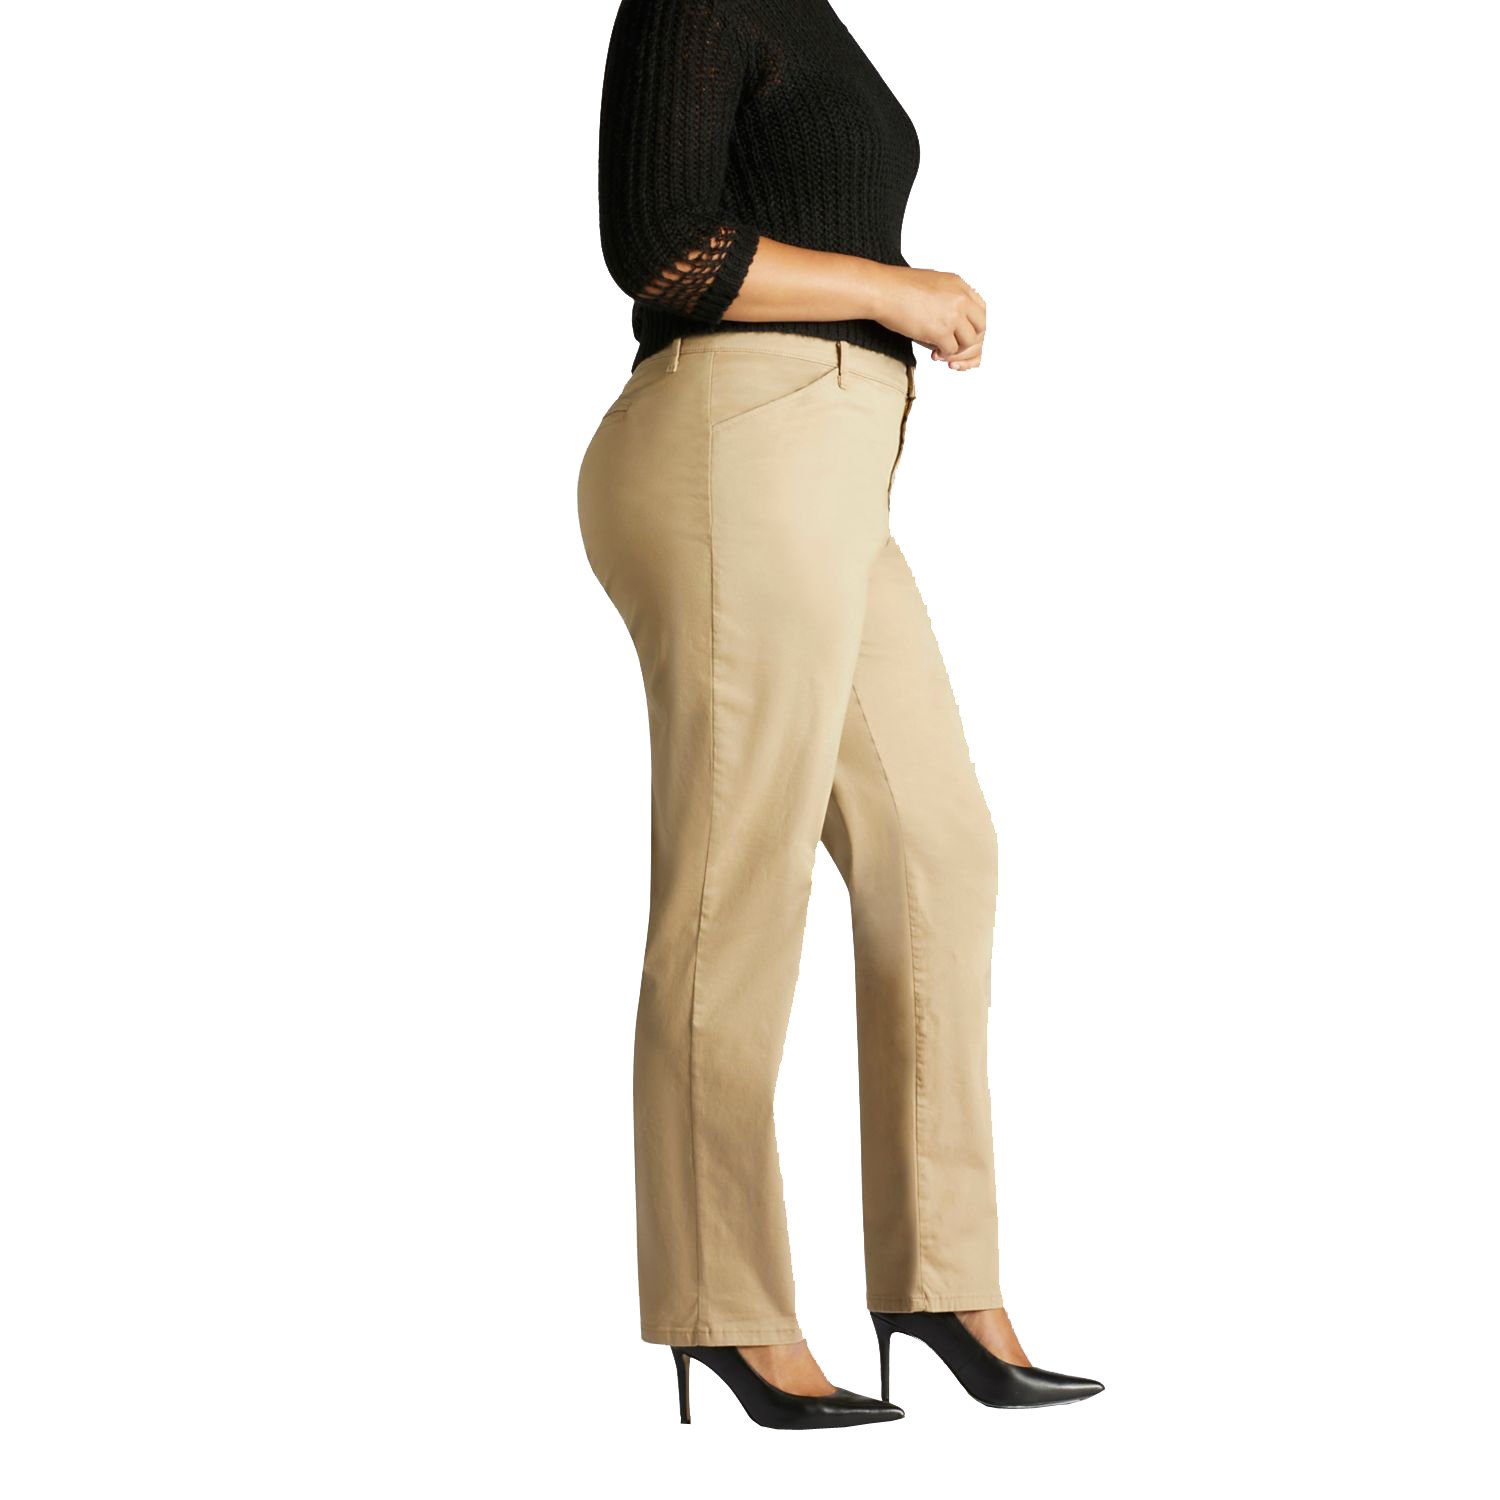 Lee Women's Plus Size Relaxed Fit All Day Straight Leg Pant